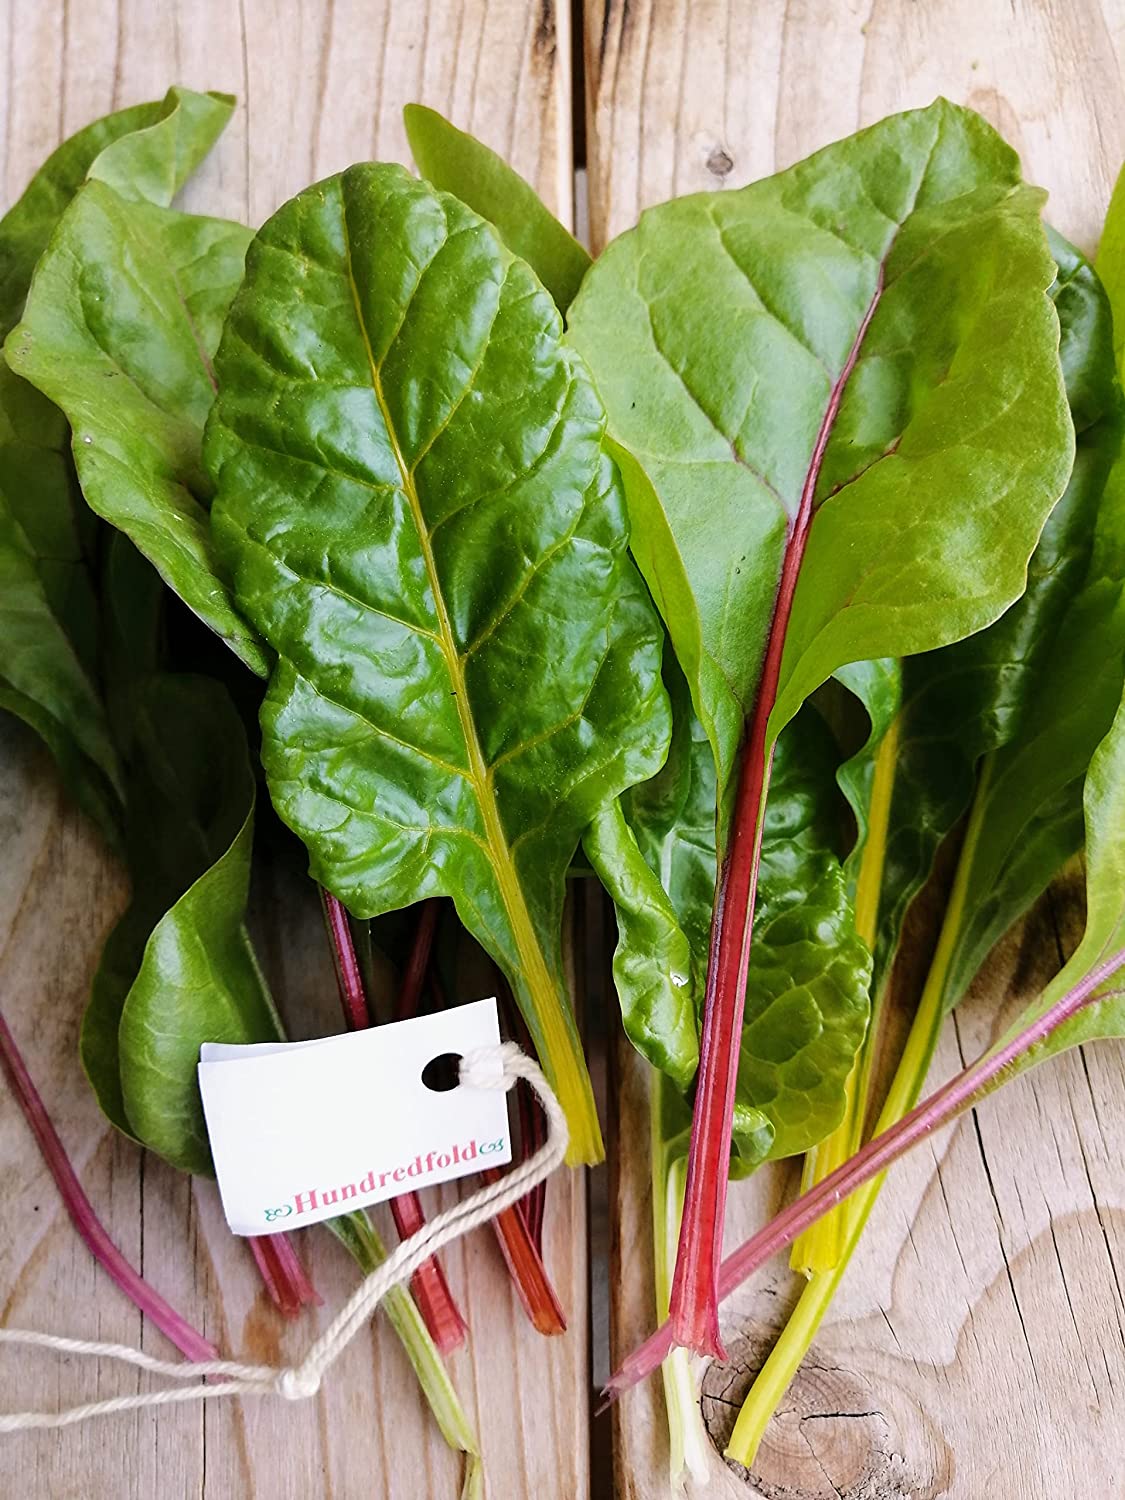 Hundredfold Mixed Color Rainbow Swiss Chard 100 Vegetable Seeds – Beta vulgaris Non-GMO Grow Your Own Food & Beautify Your Space